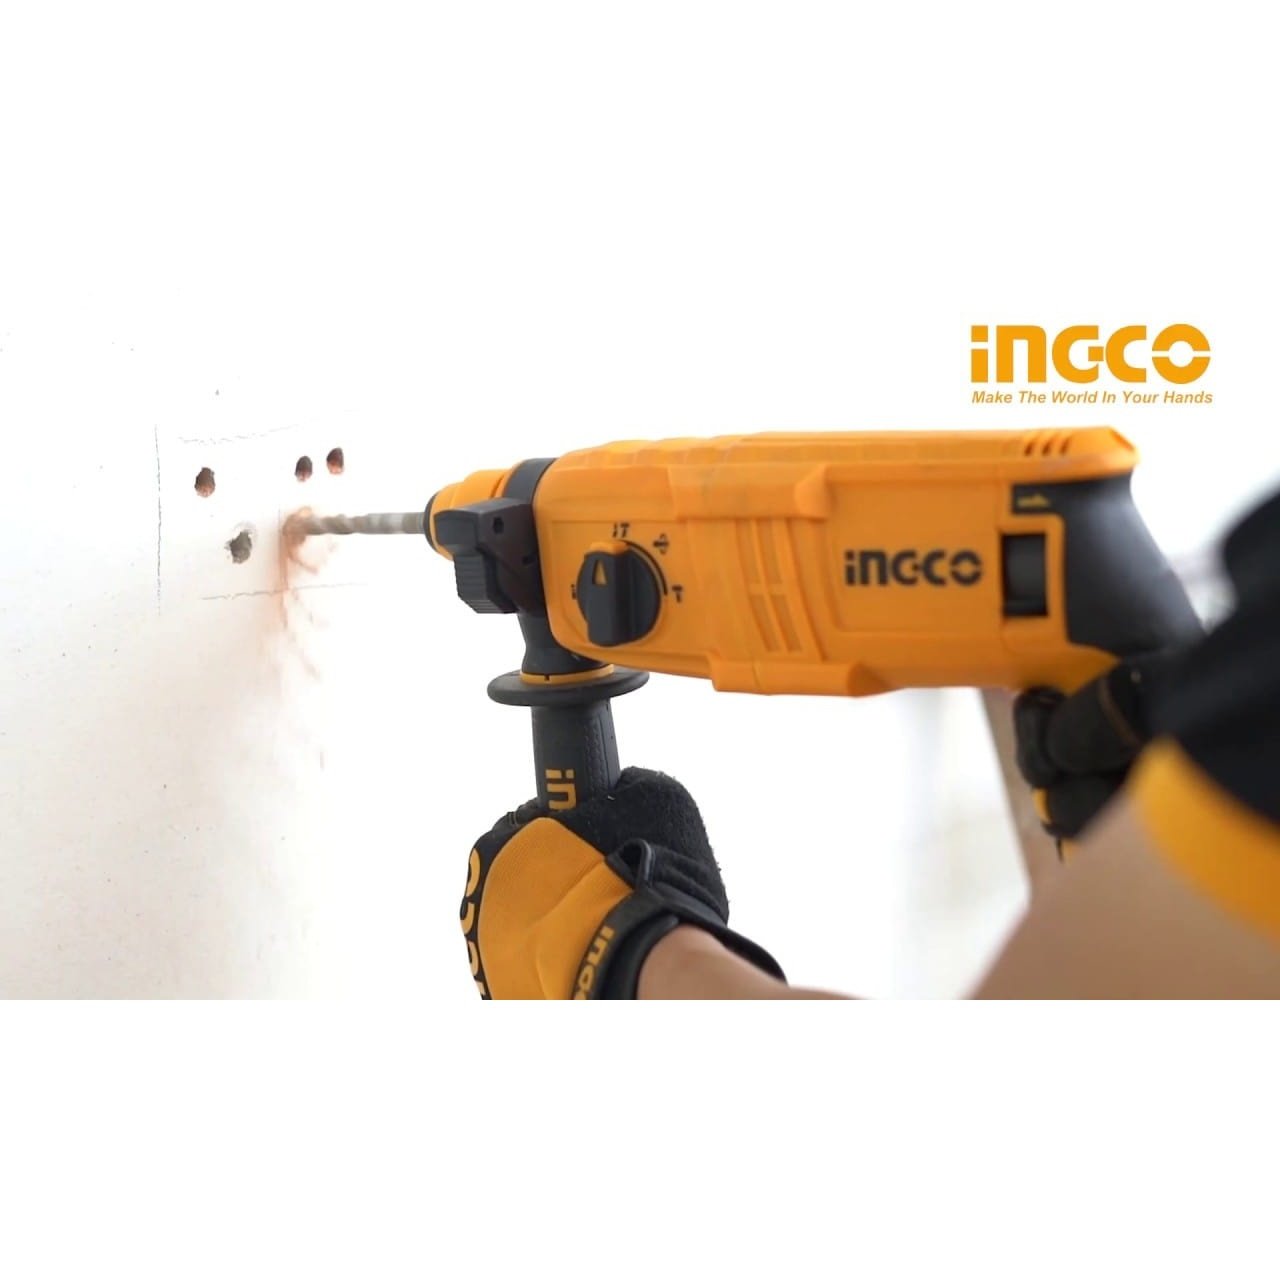 Ingco Rotary Hammer 650W - RGH6508 | Buy Online in Accra, Ghana - Supply Master Drill Buy Tools hardware Building materials